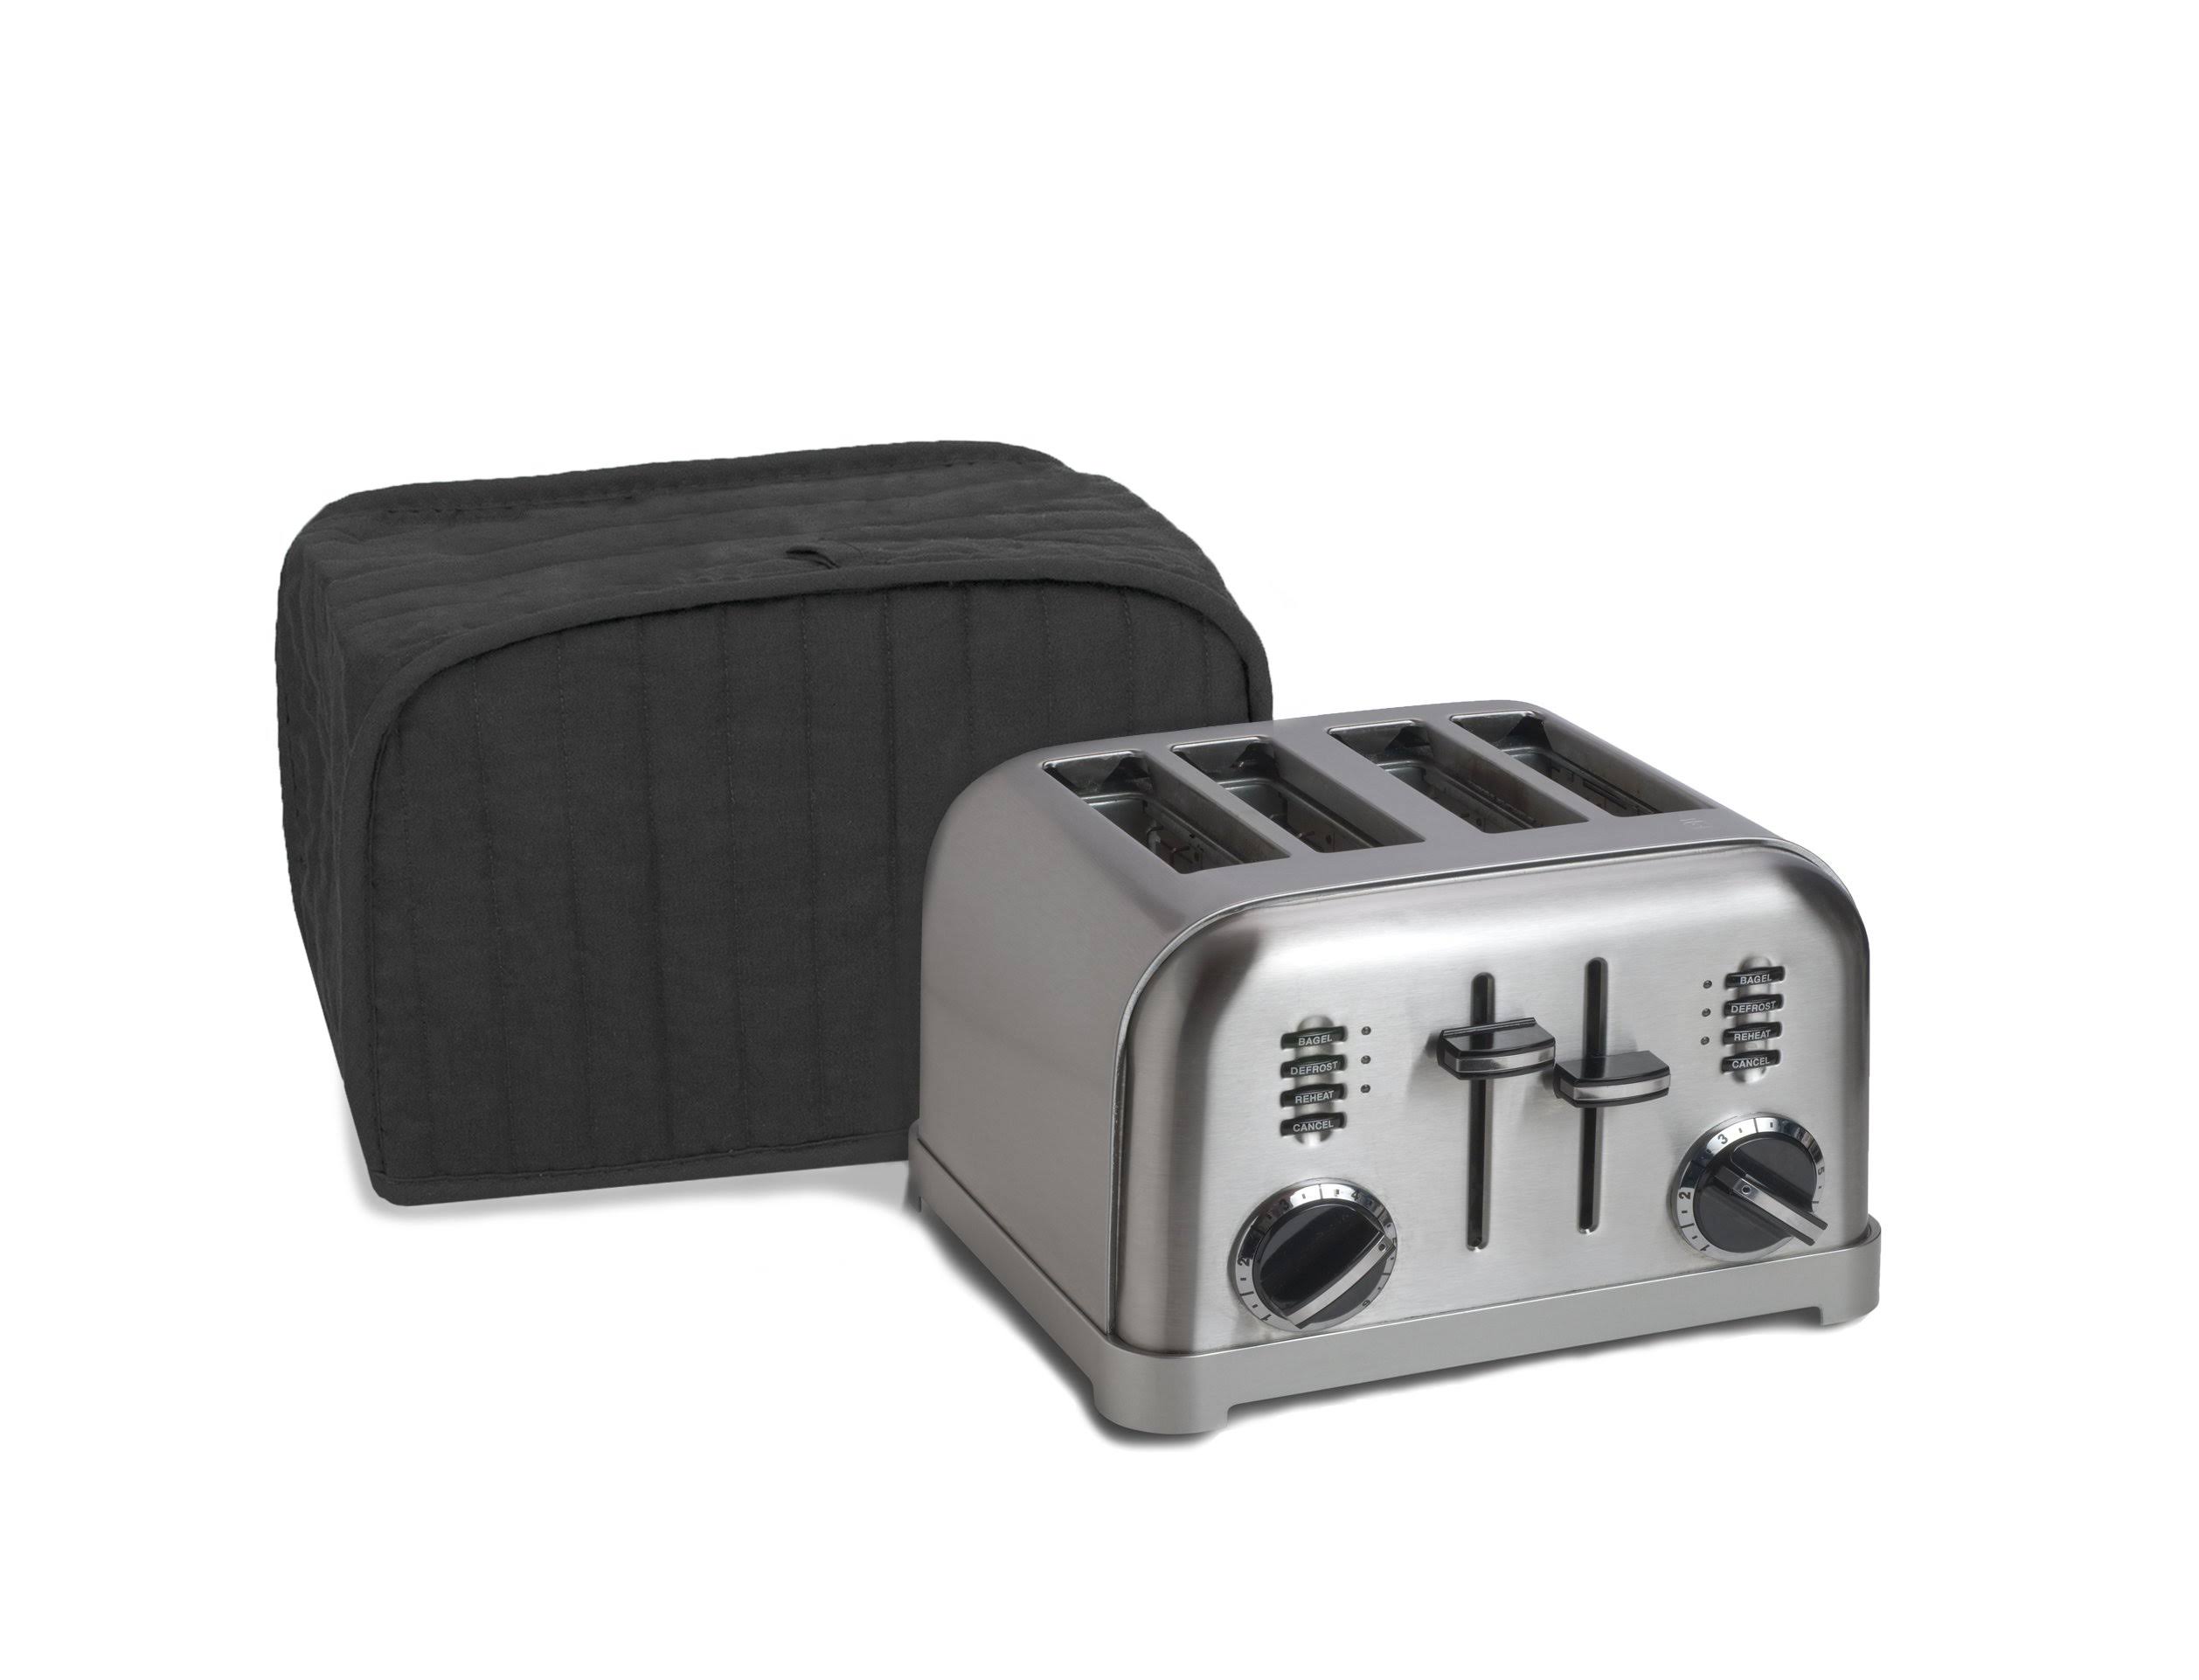 Ritz 08014 Quilted Four Slice Toaster Cover, Black